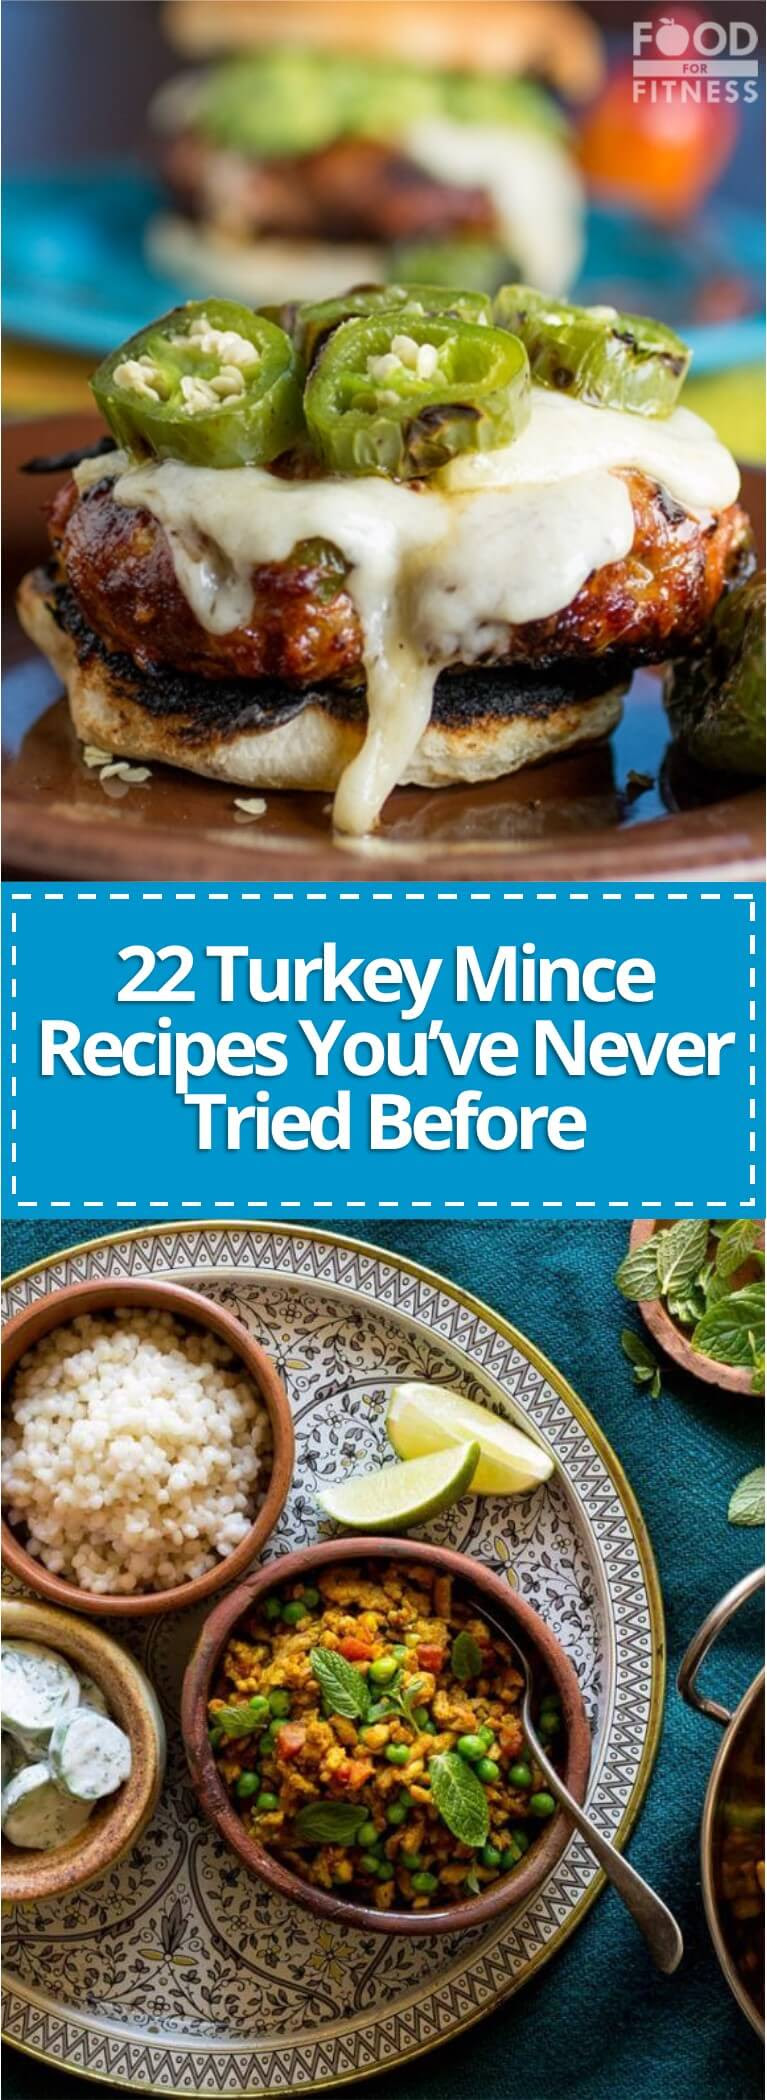 22 Turkey Mince Recipes You've Never Tried Before